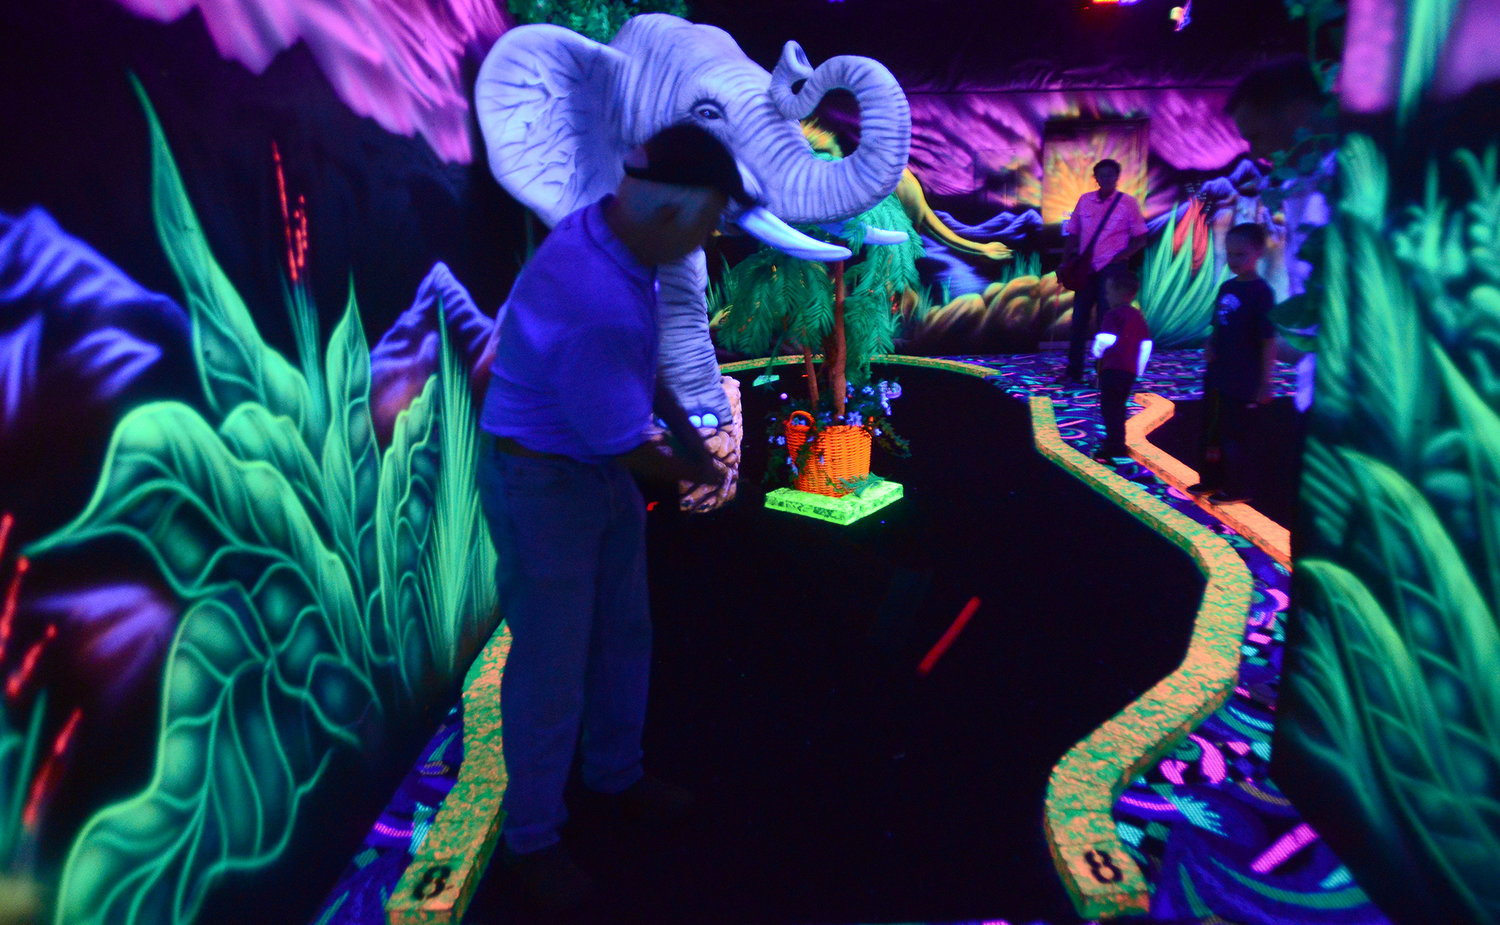 Black Light Miniature Golf Coming to Yard Birds | The Daily Chronicle